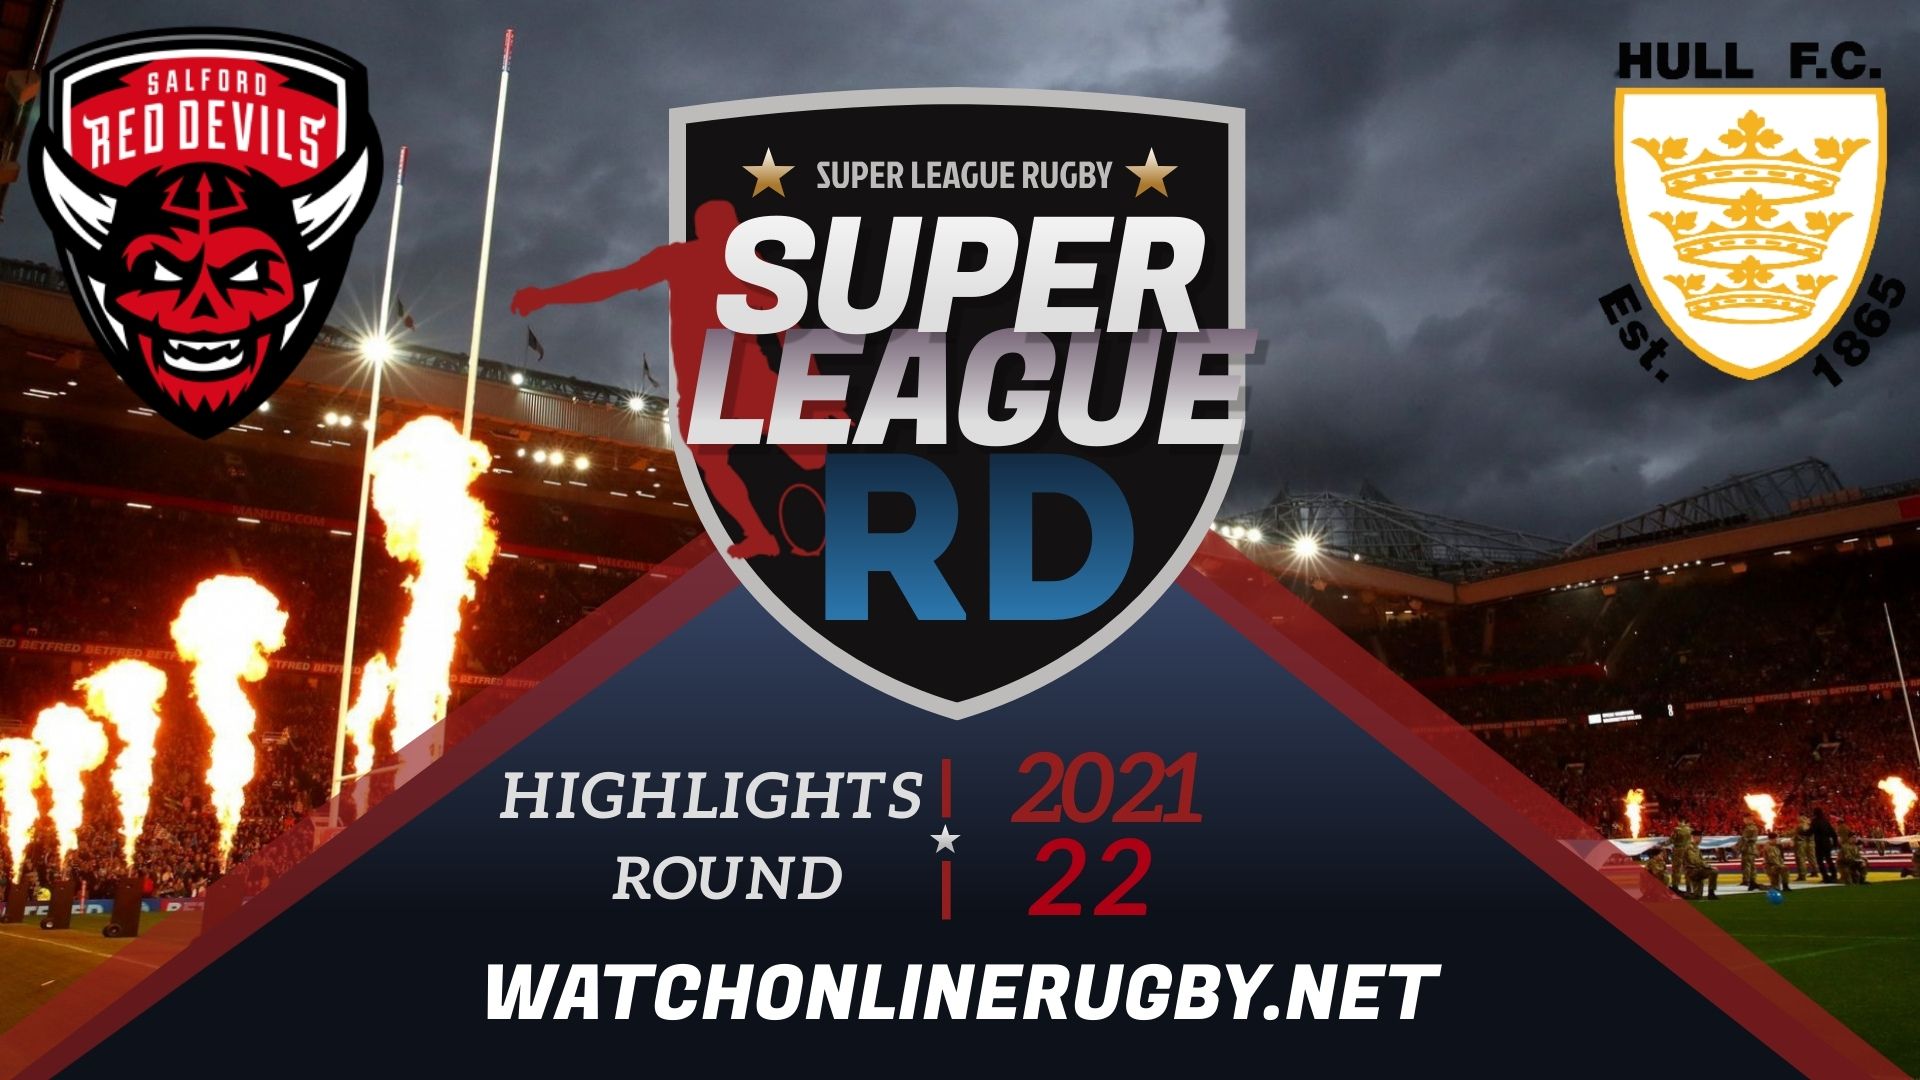 Salford Red Devils Vs Hull FC Super League Rugby 2021 RD 22